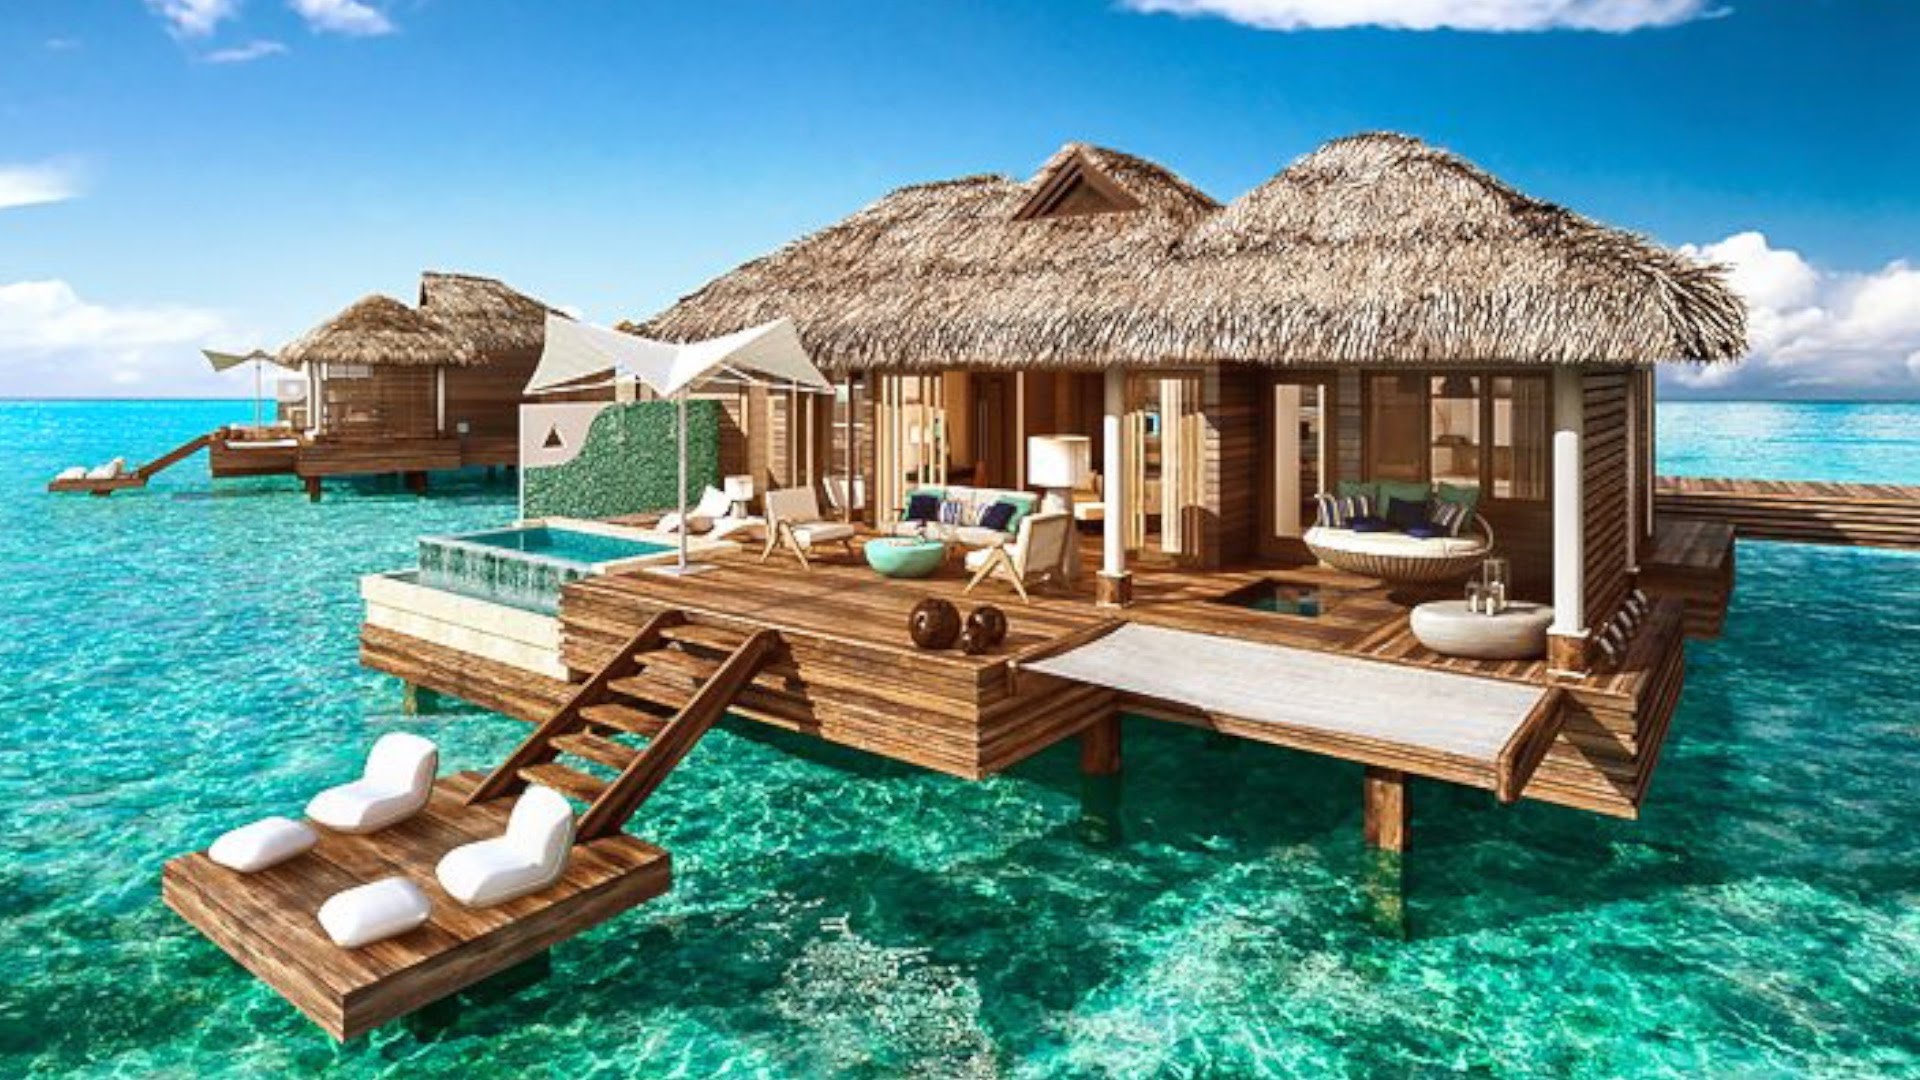 New Overwater Bungalows In Jamaica Are What Dreams Are Made Of - YouTube